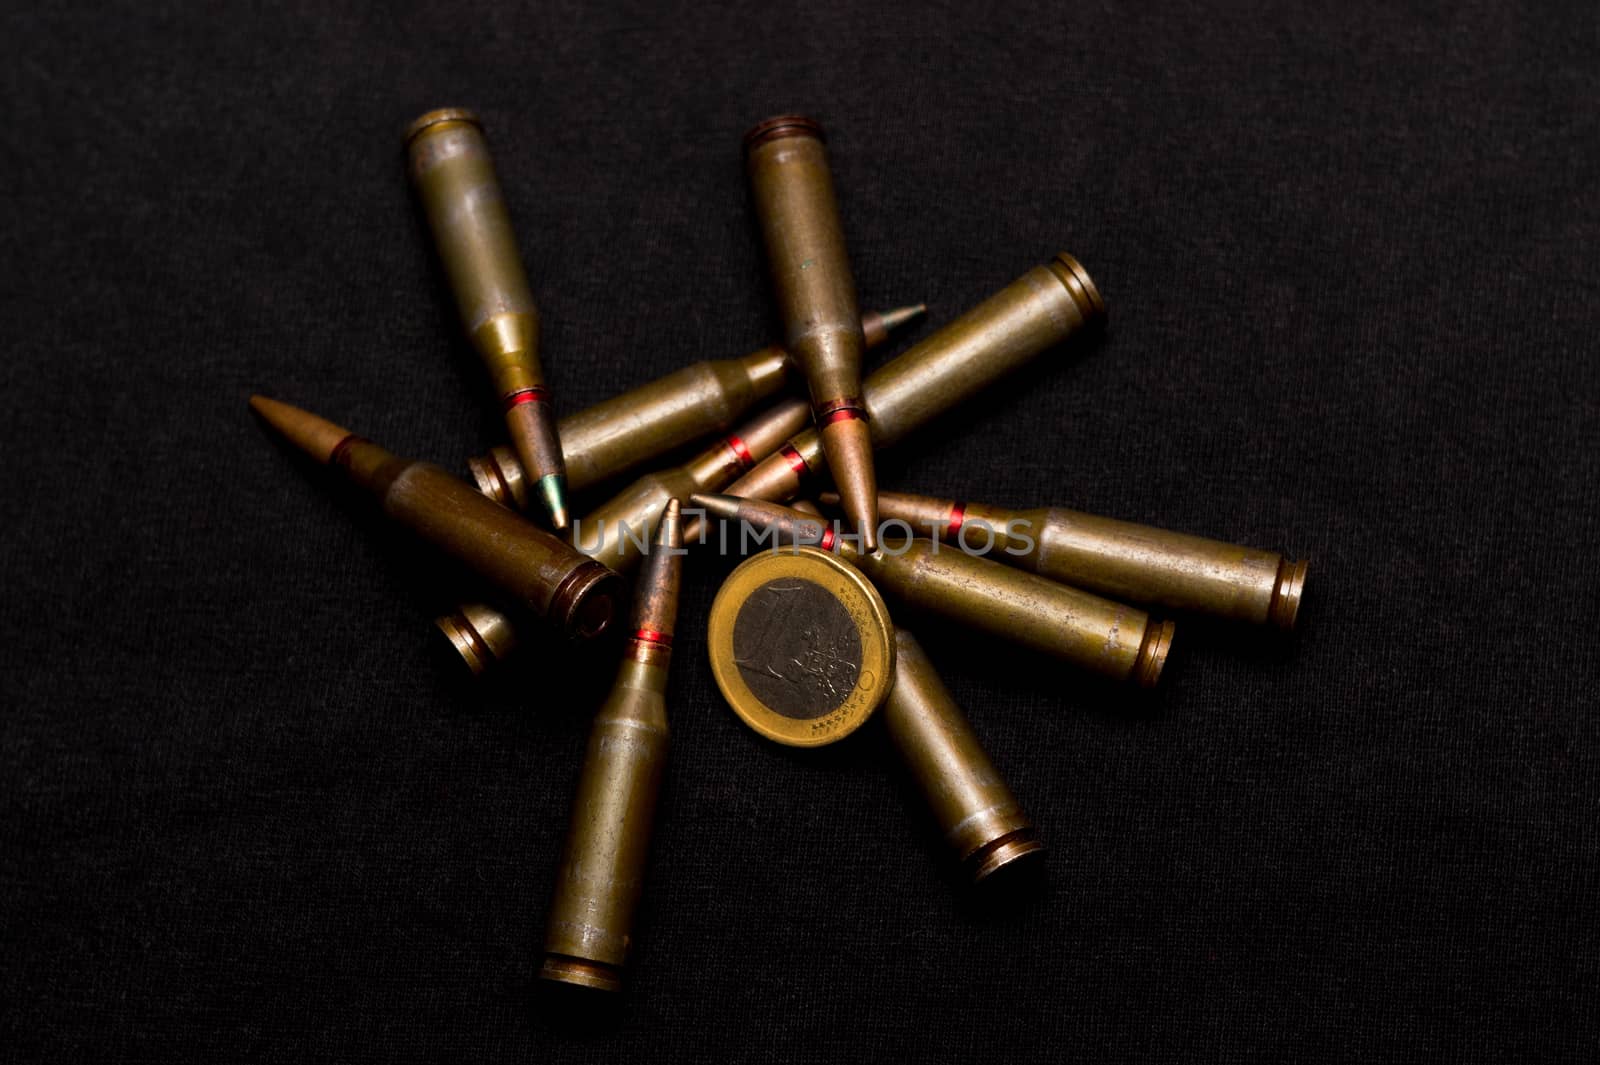 Rifle ammo and one euro coin on black background. Symbolizes the war for money and one of the world's problems.